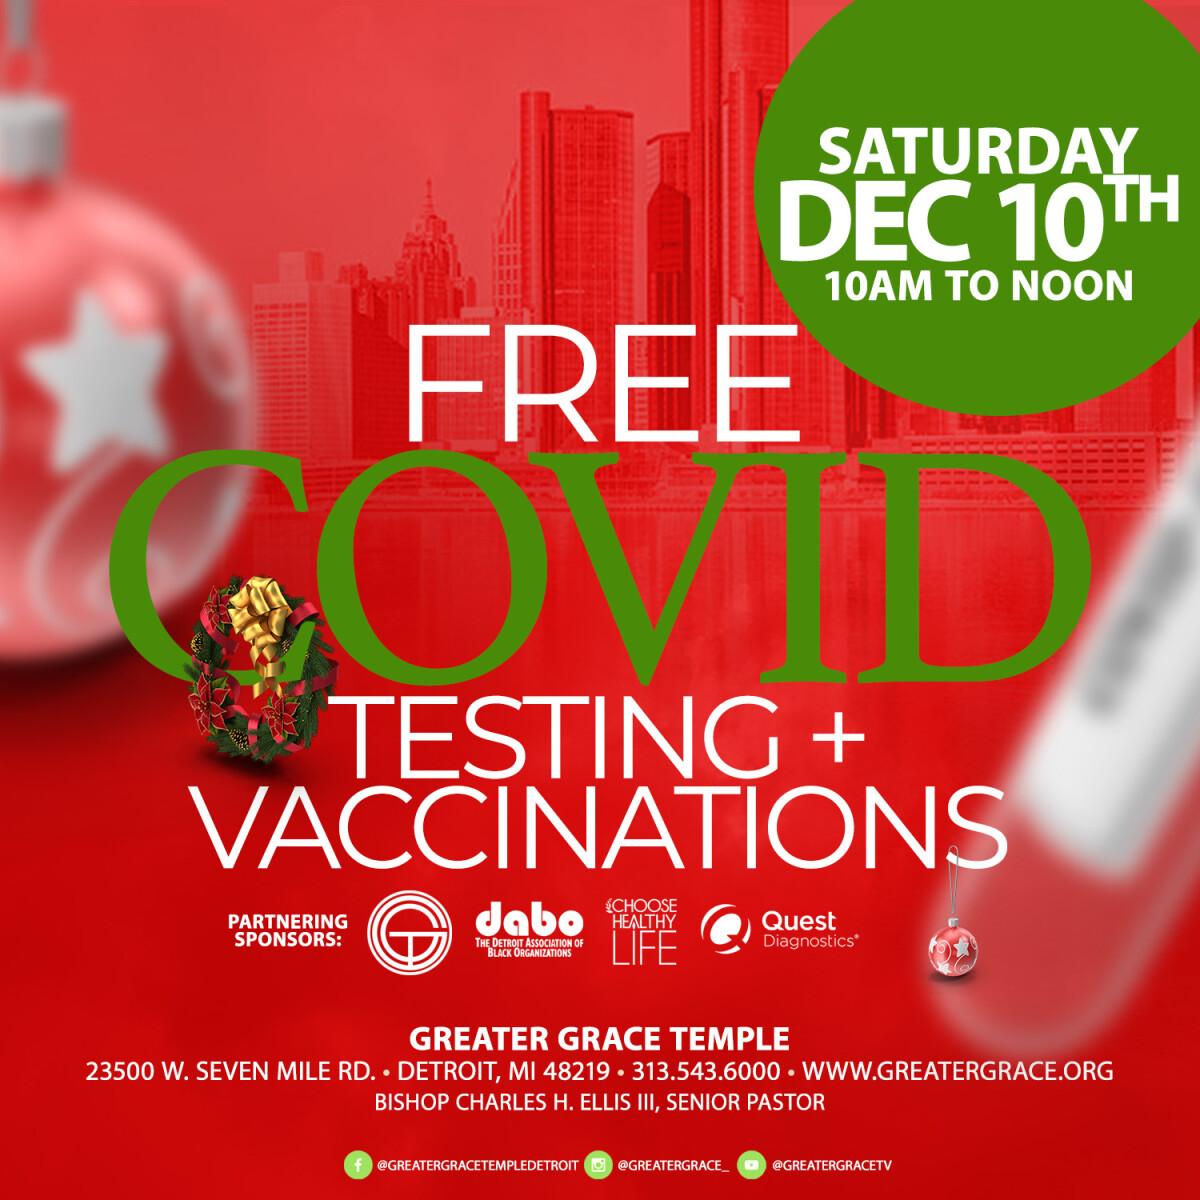 Free Covid Testing + Vaccinations